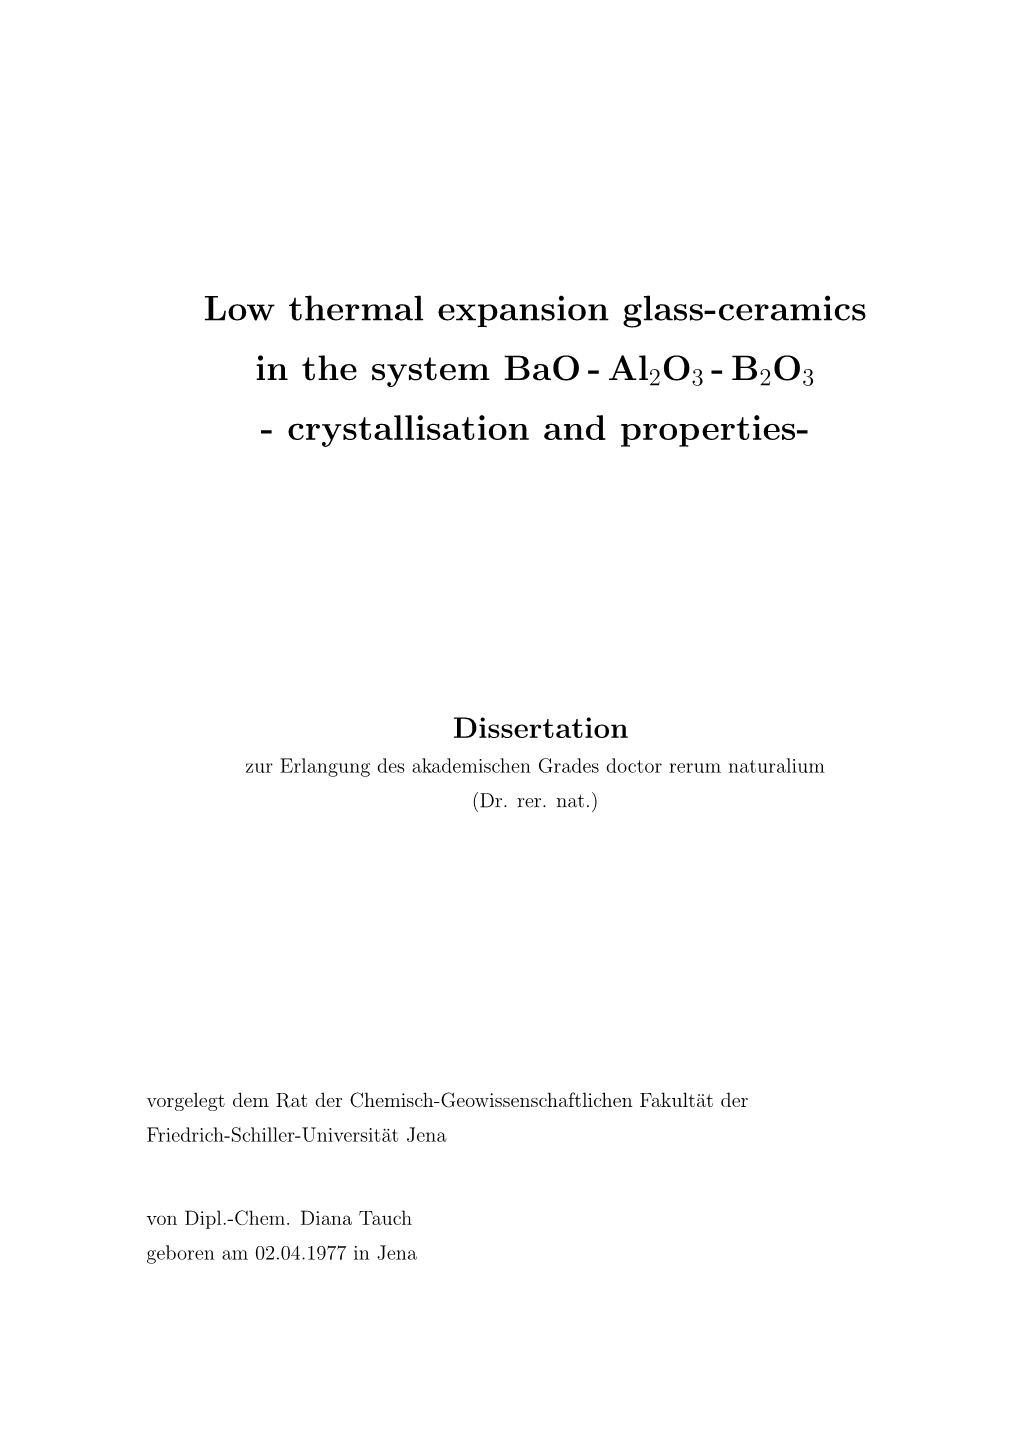 Low Thermal Expansion Glass-Ceramics in the System